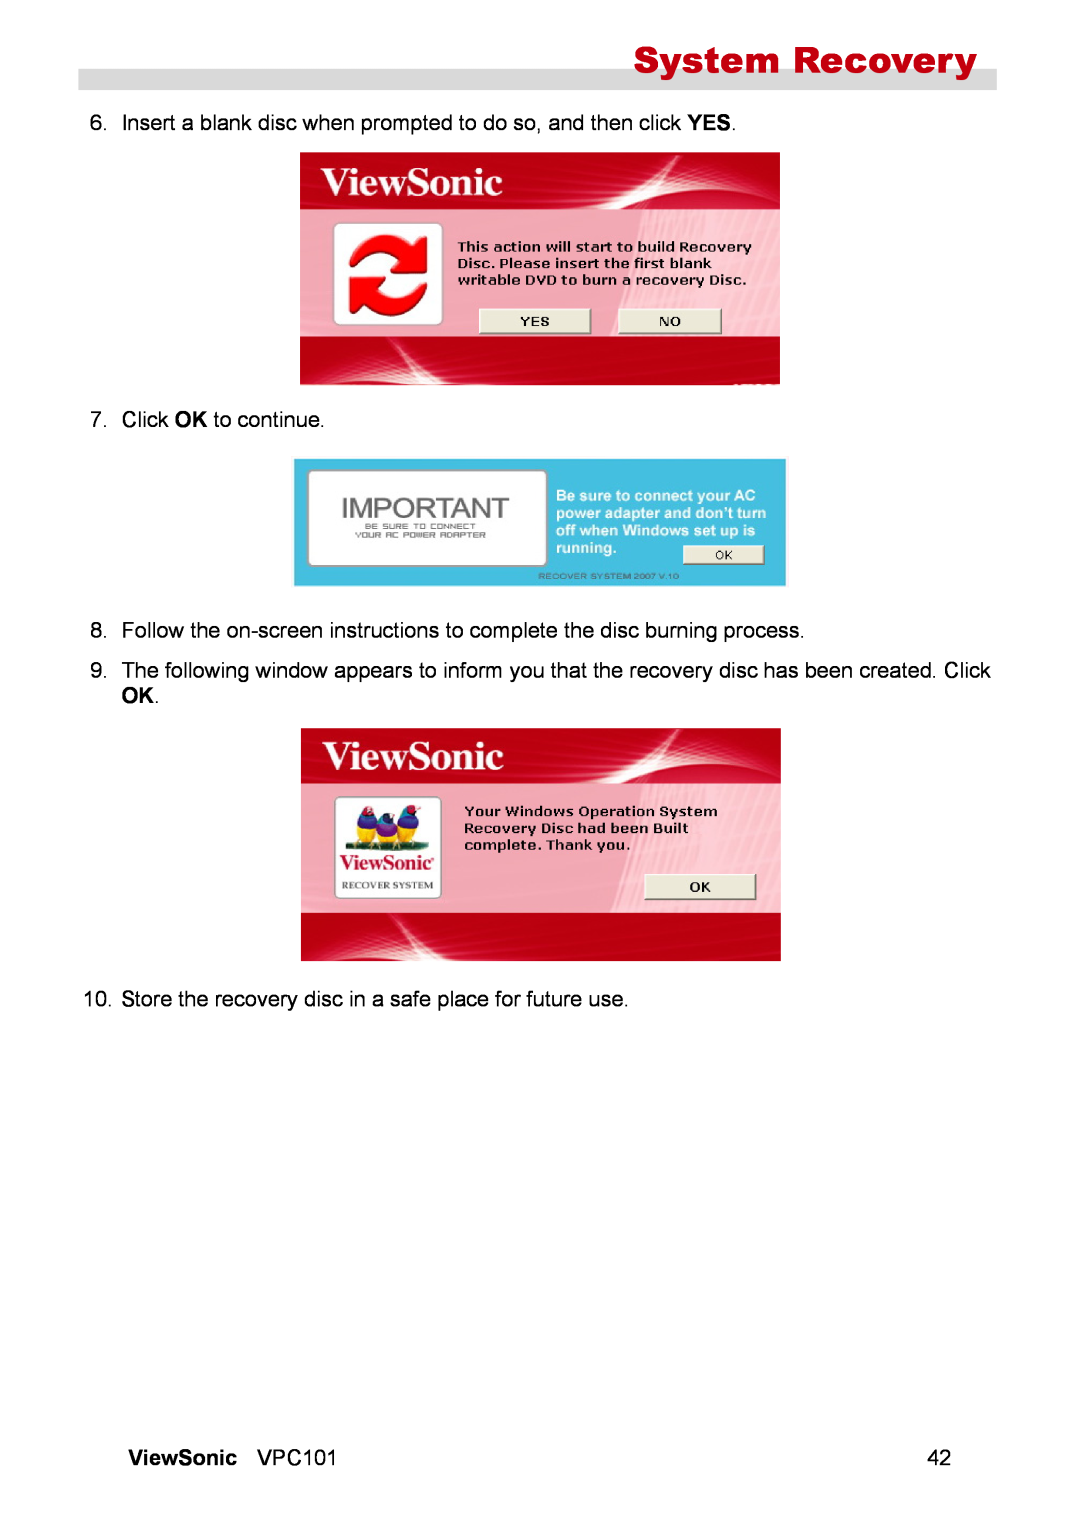 ViewSonic VPC101 System Recovery, Insert a blank disc when prompted to do so, and then click YES, Click OK to continue 